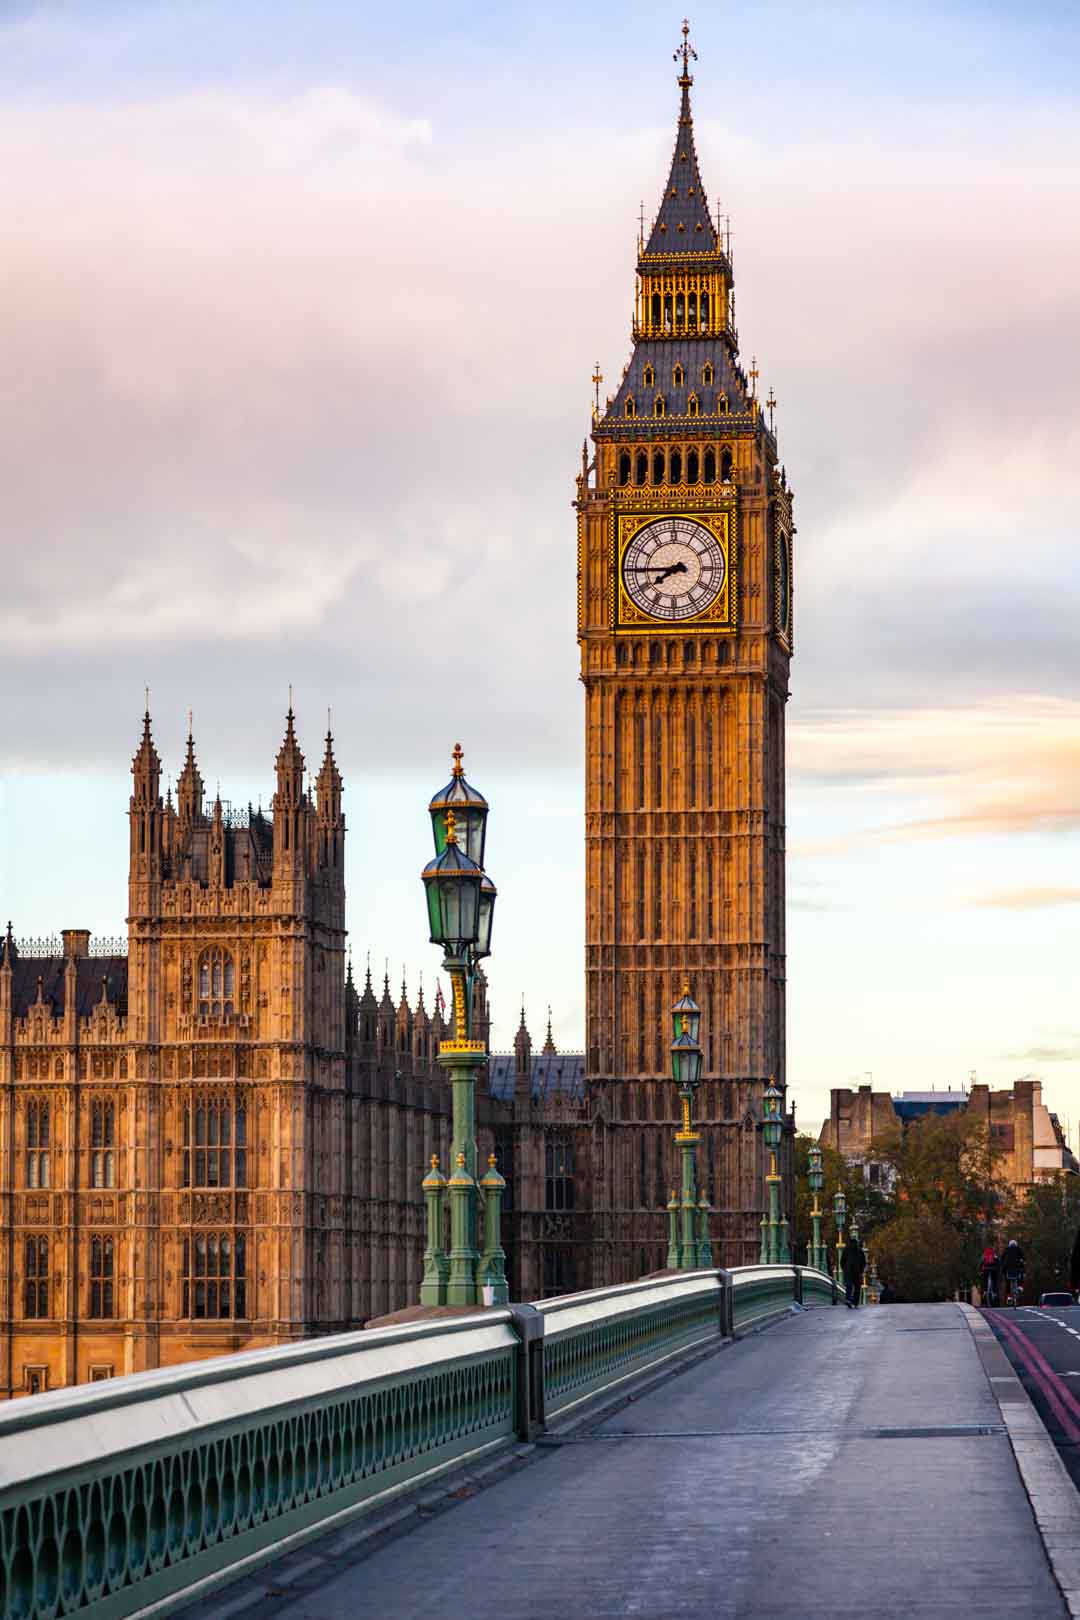 Palace of Westminster Elizabeth Tower aka Big Ben as seen from the Westminster Bridge in London